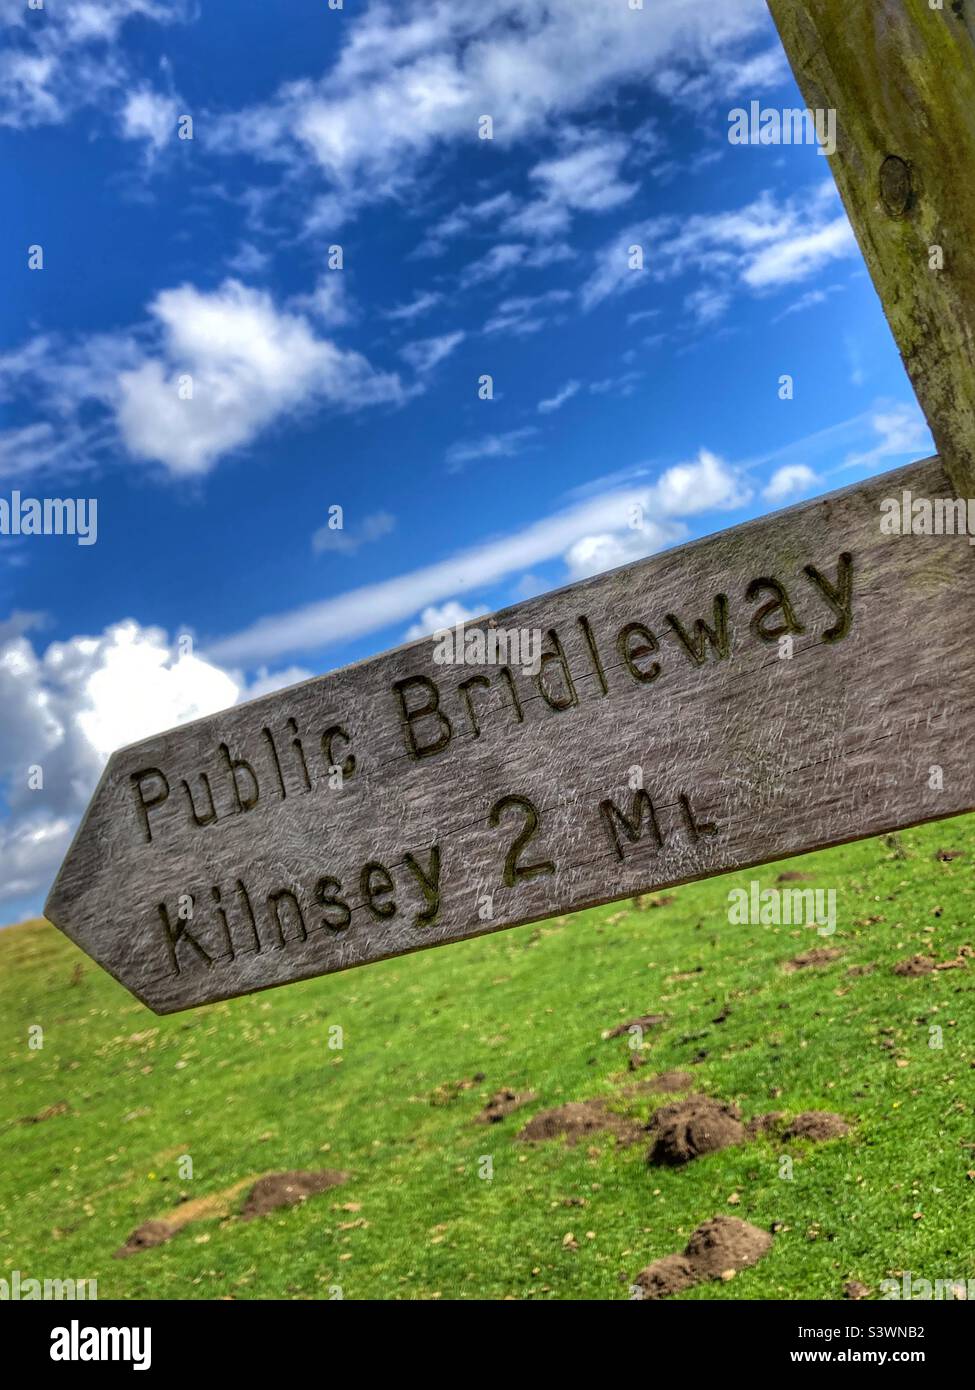 Public Bridleway sign Mastiles lane in the Yorkshire Dales Stock Photo